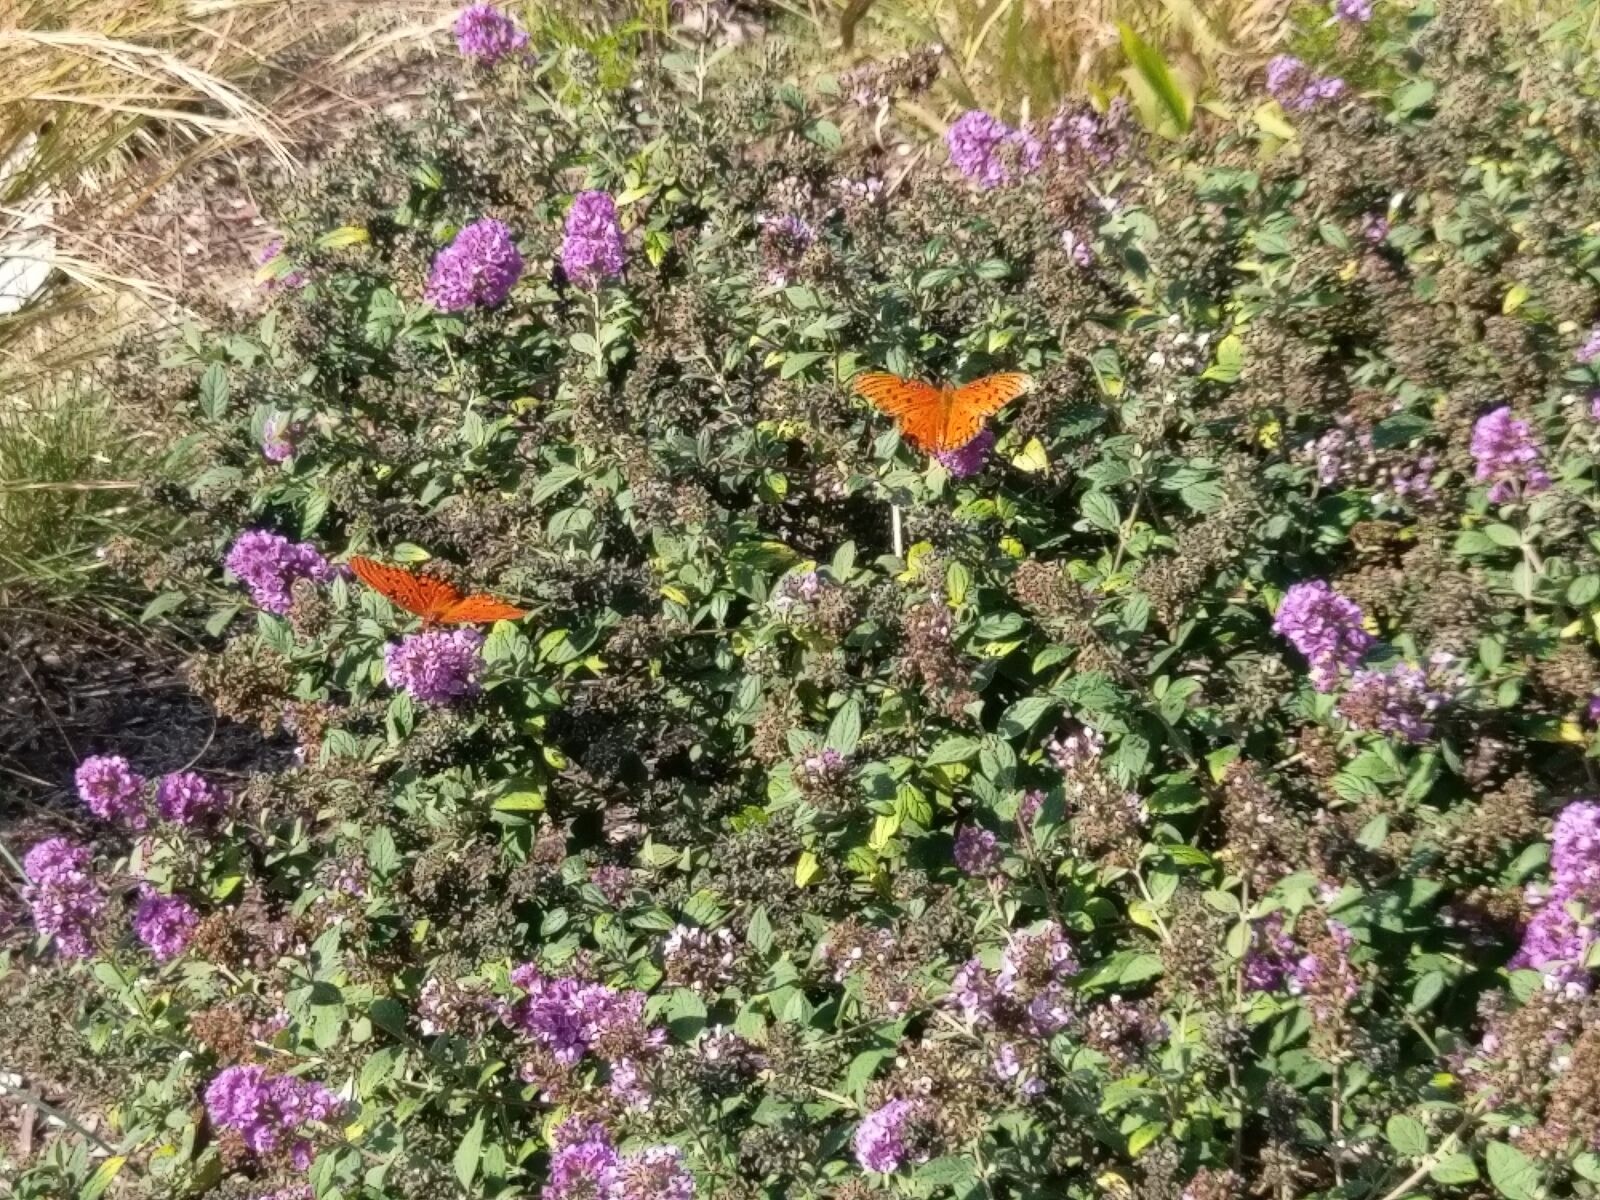 HTC 10 sample photo. Butterfly, nature, plants photography